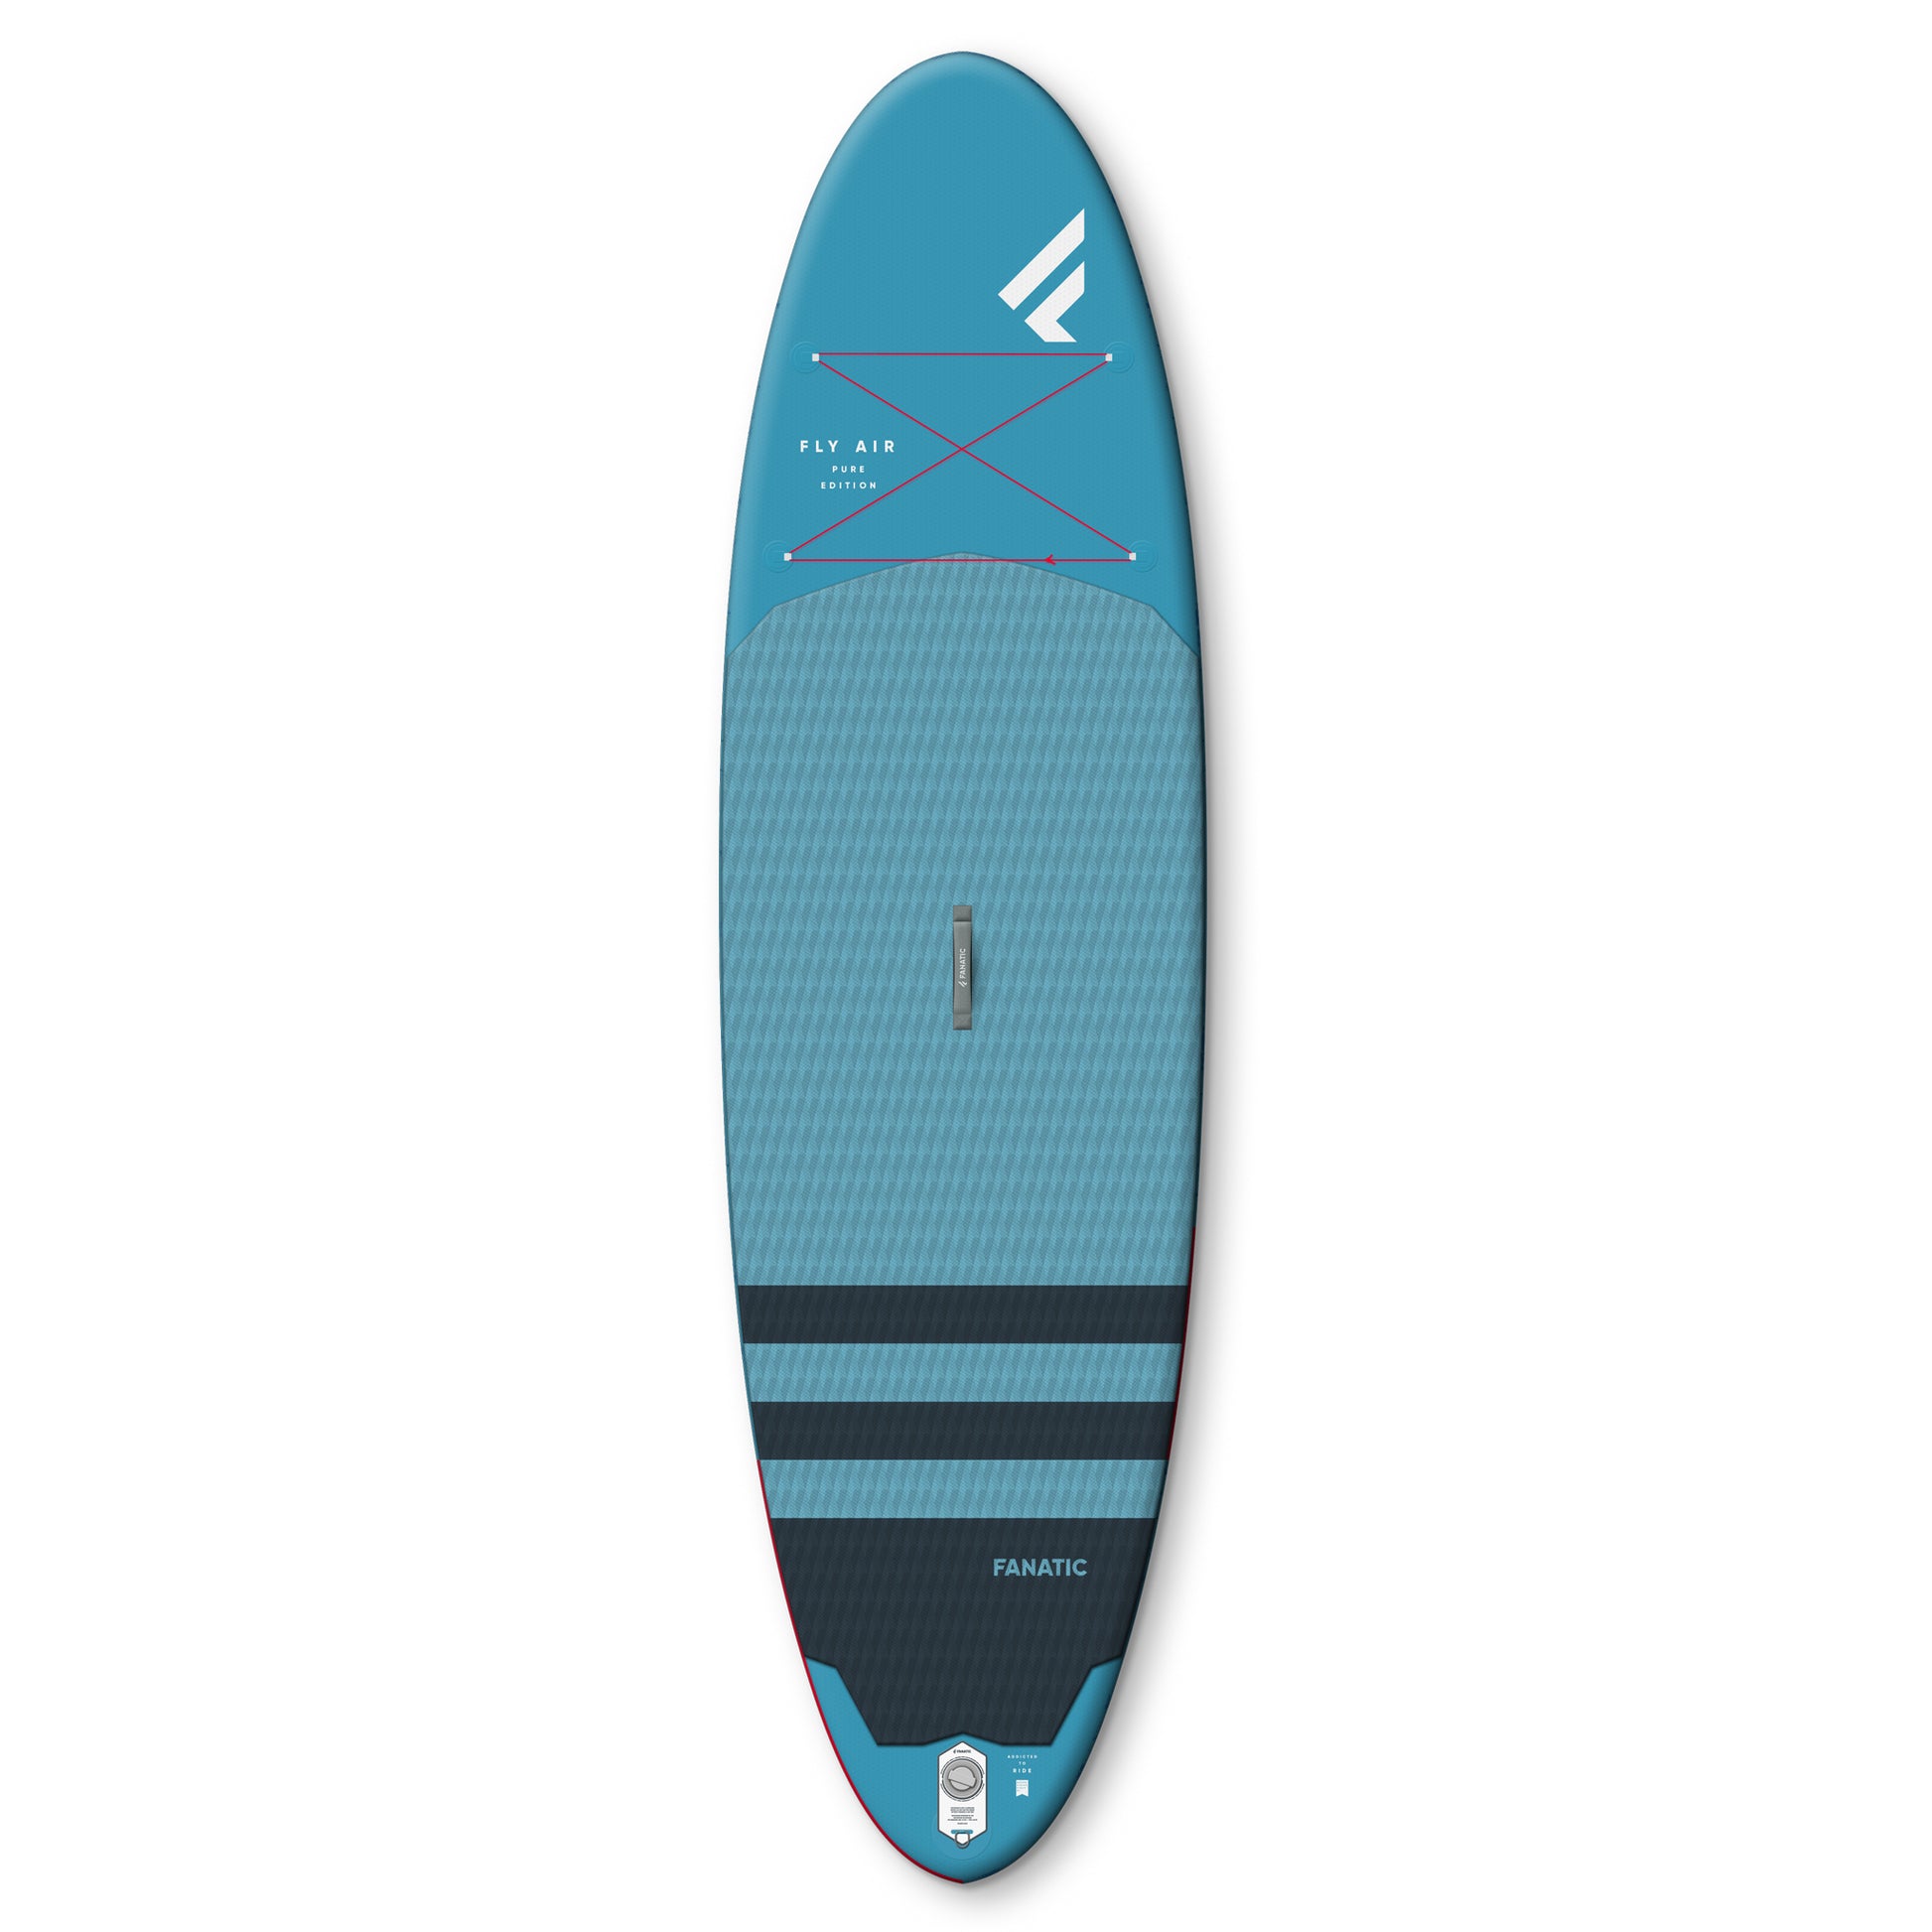 Fanatic iSUP Fly Air – Inflatabale SUP